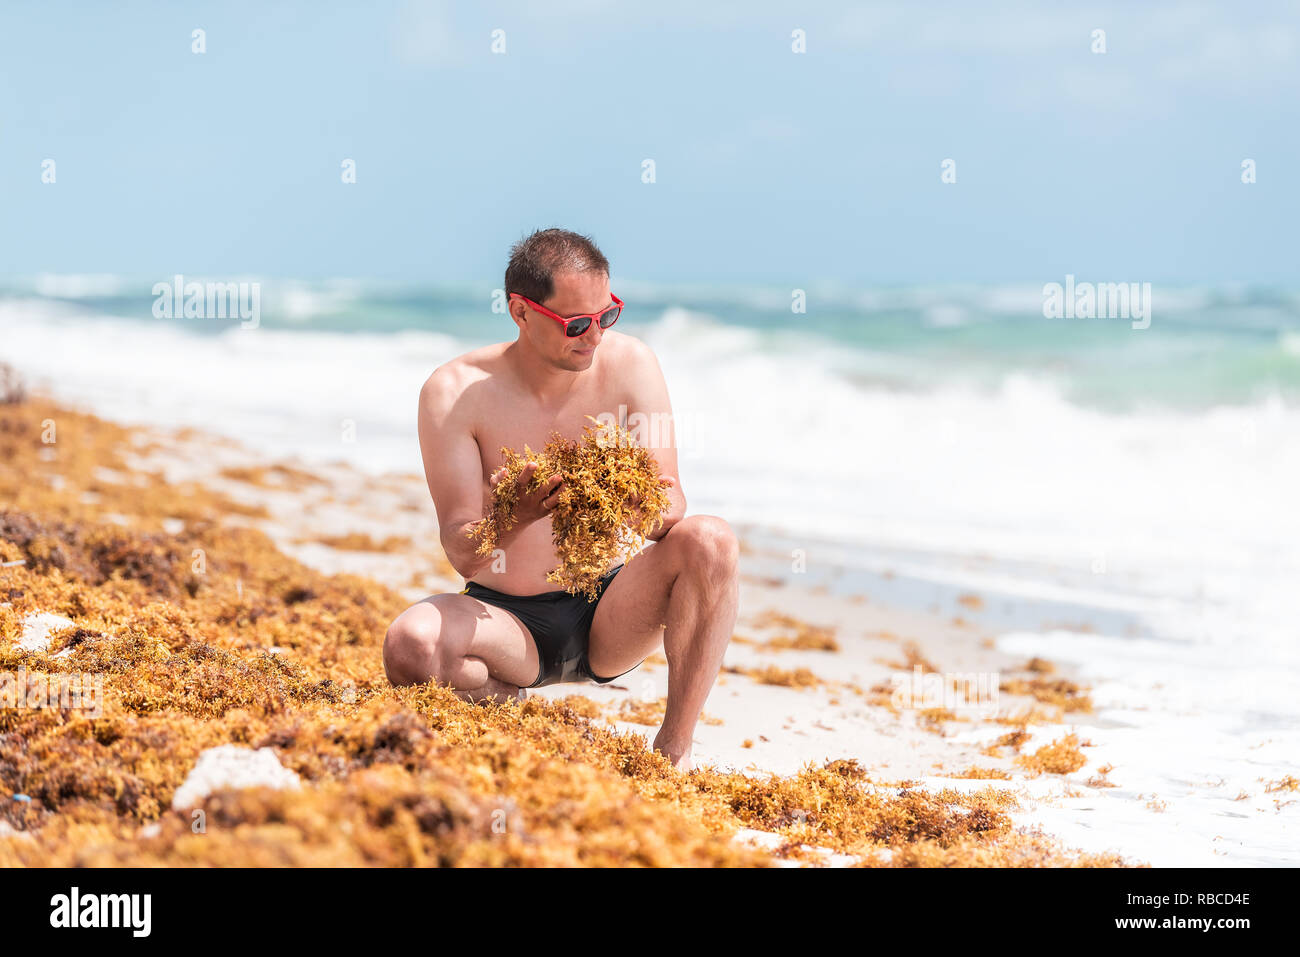 Young man on beach during sunny day with red sunglasses in Miami, Florida with blue sky background, sitting squatting crouching holding yellow sargass Stock Photo